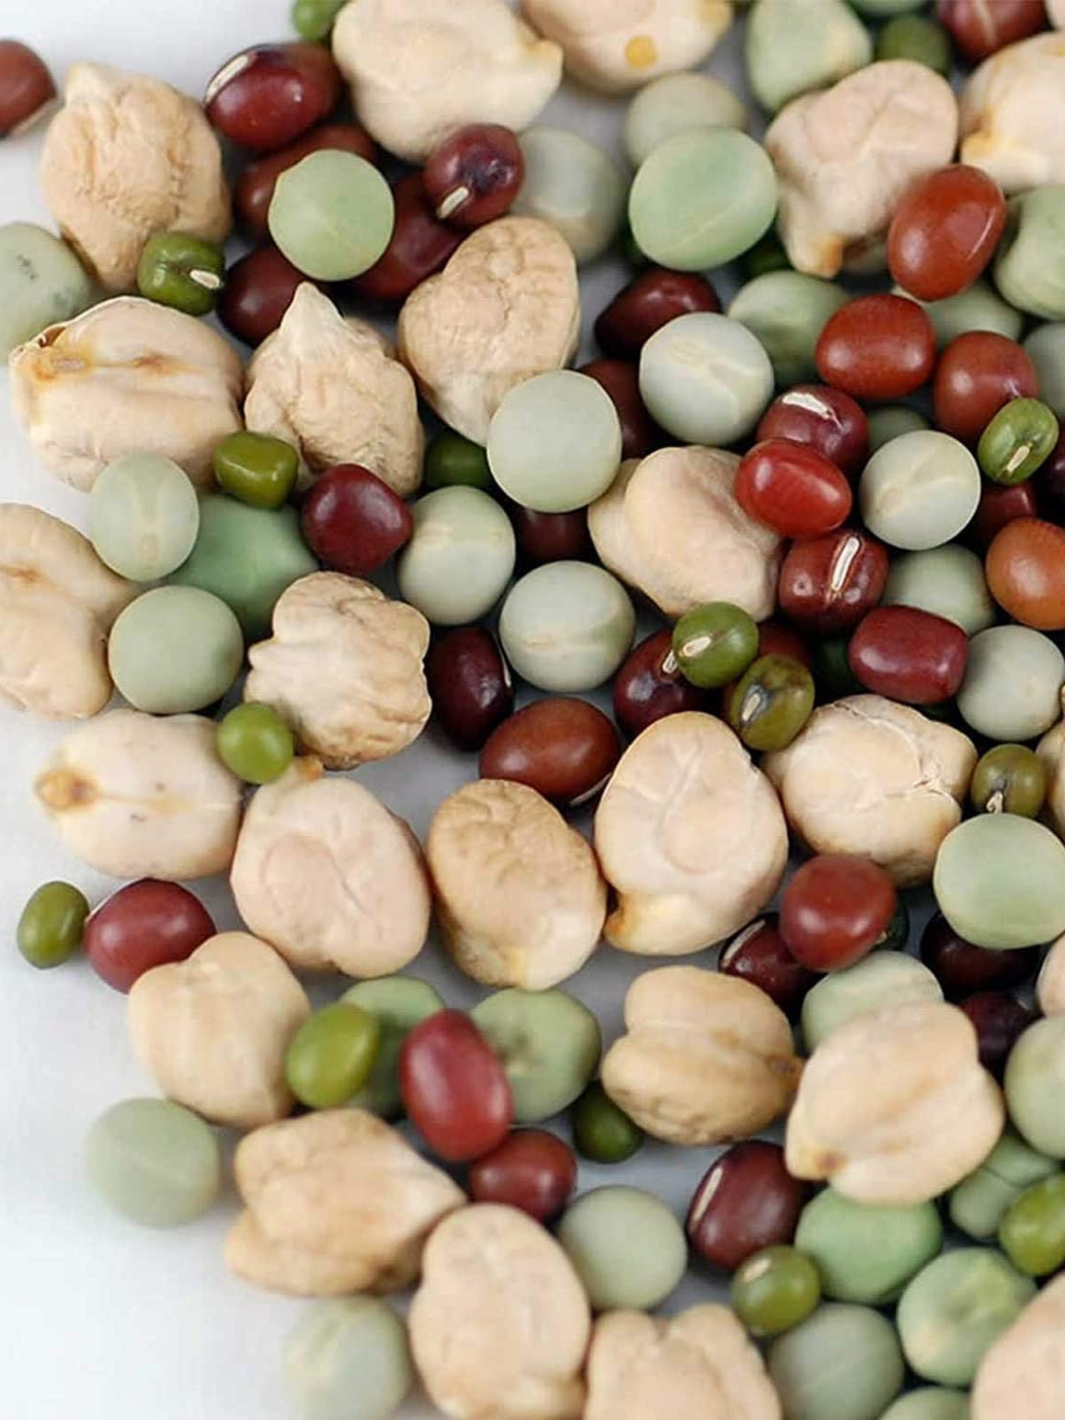 Closeup of Handy Pantry Organic Protein Powerhouse Mix Sprouting Seeds